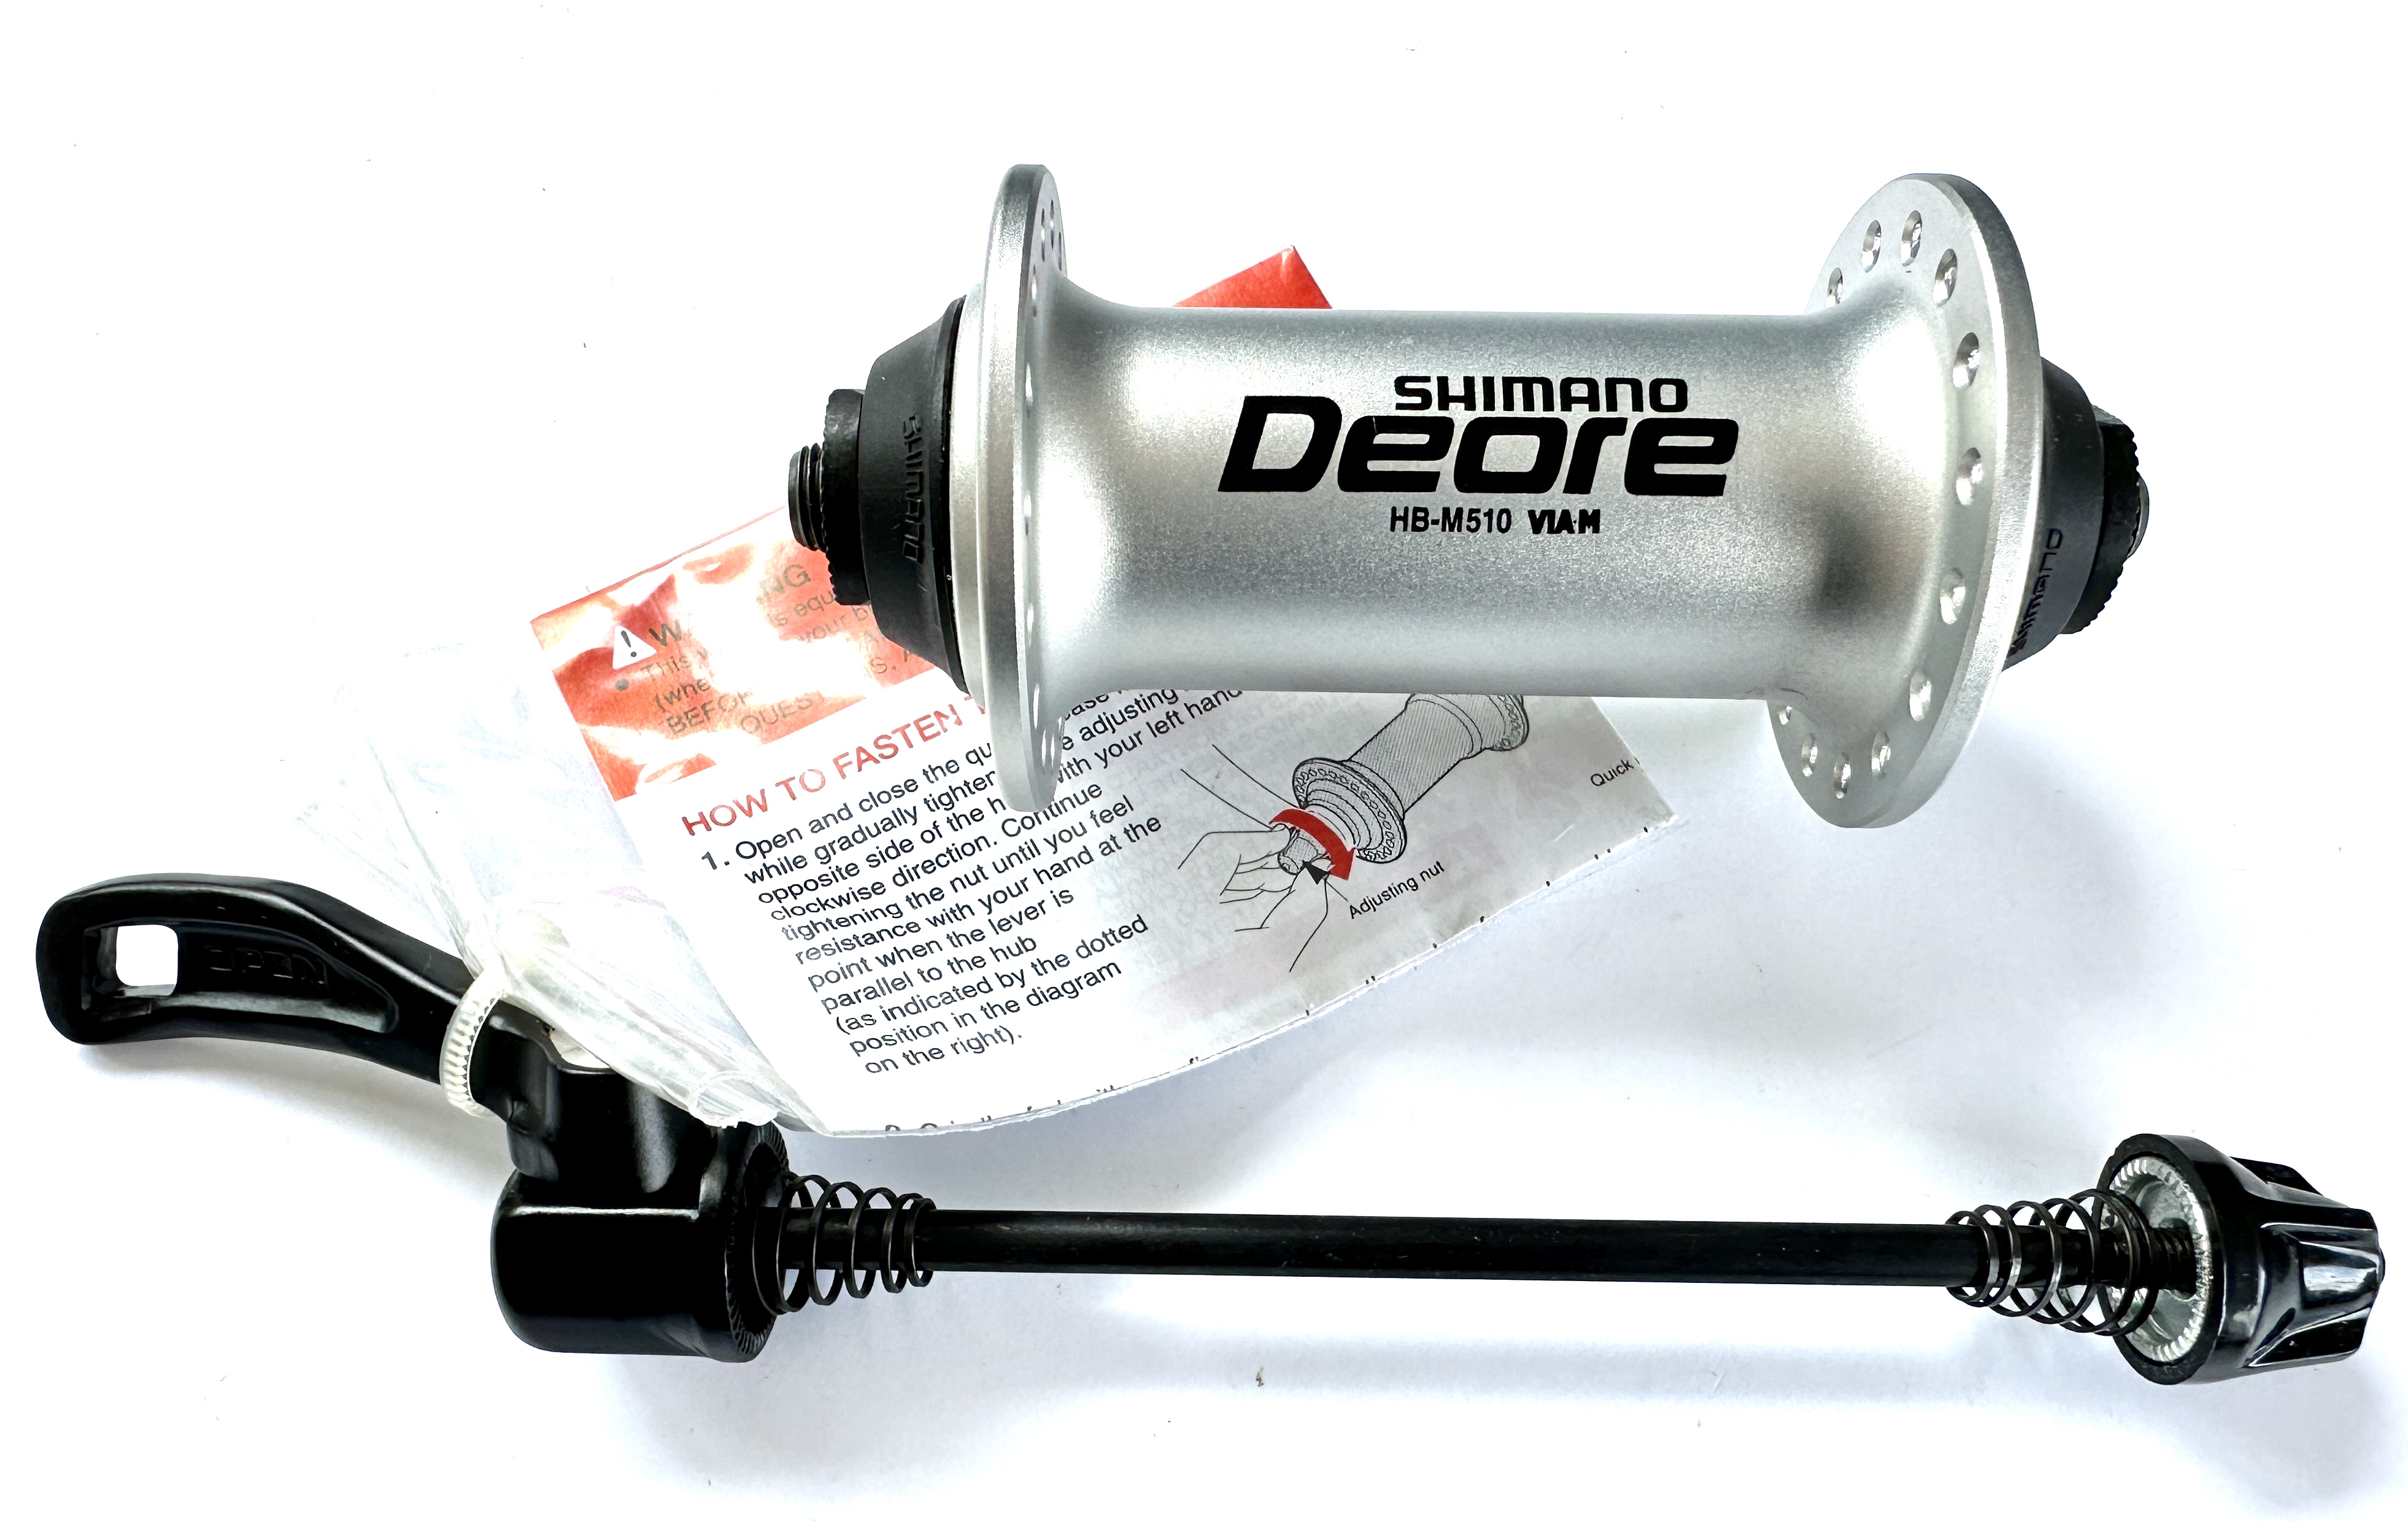 Shimano Deore HB-M510 front hub 36-hole, silver